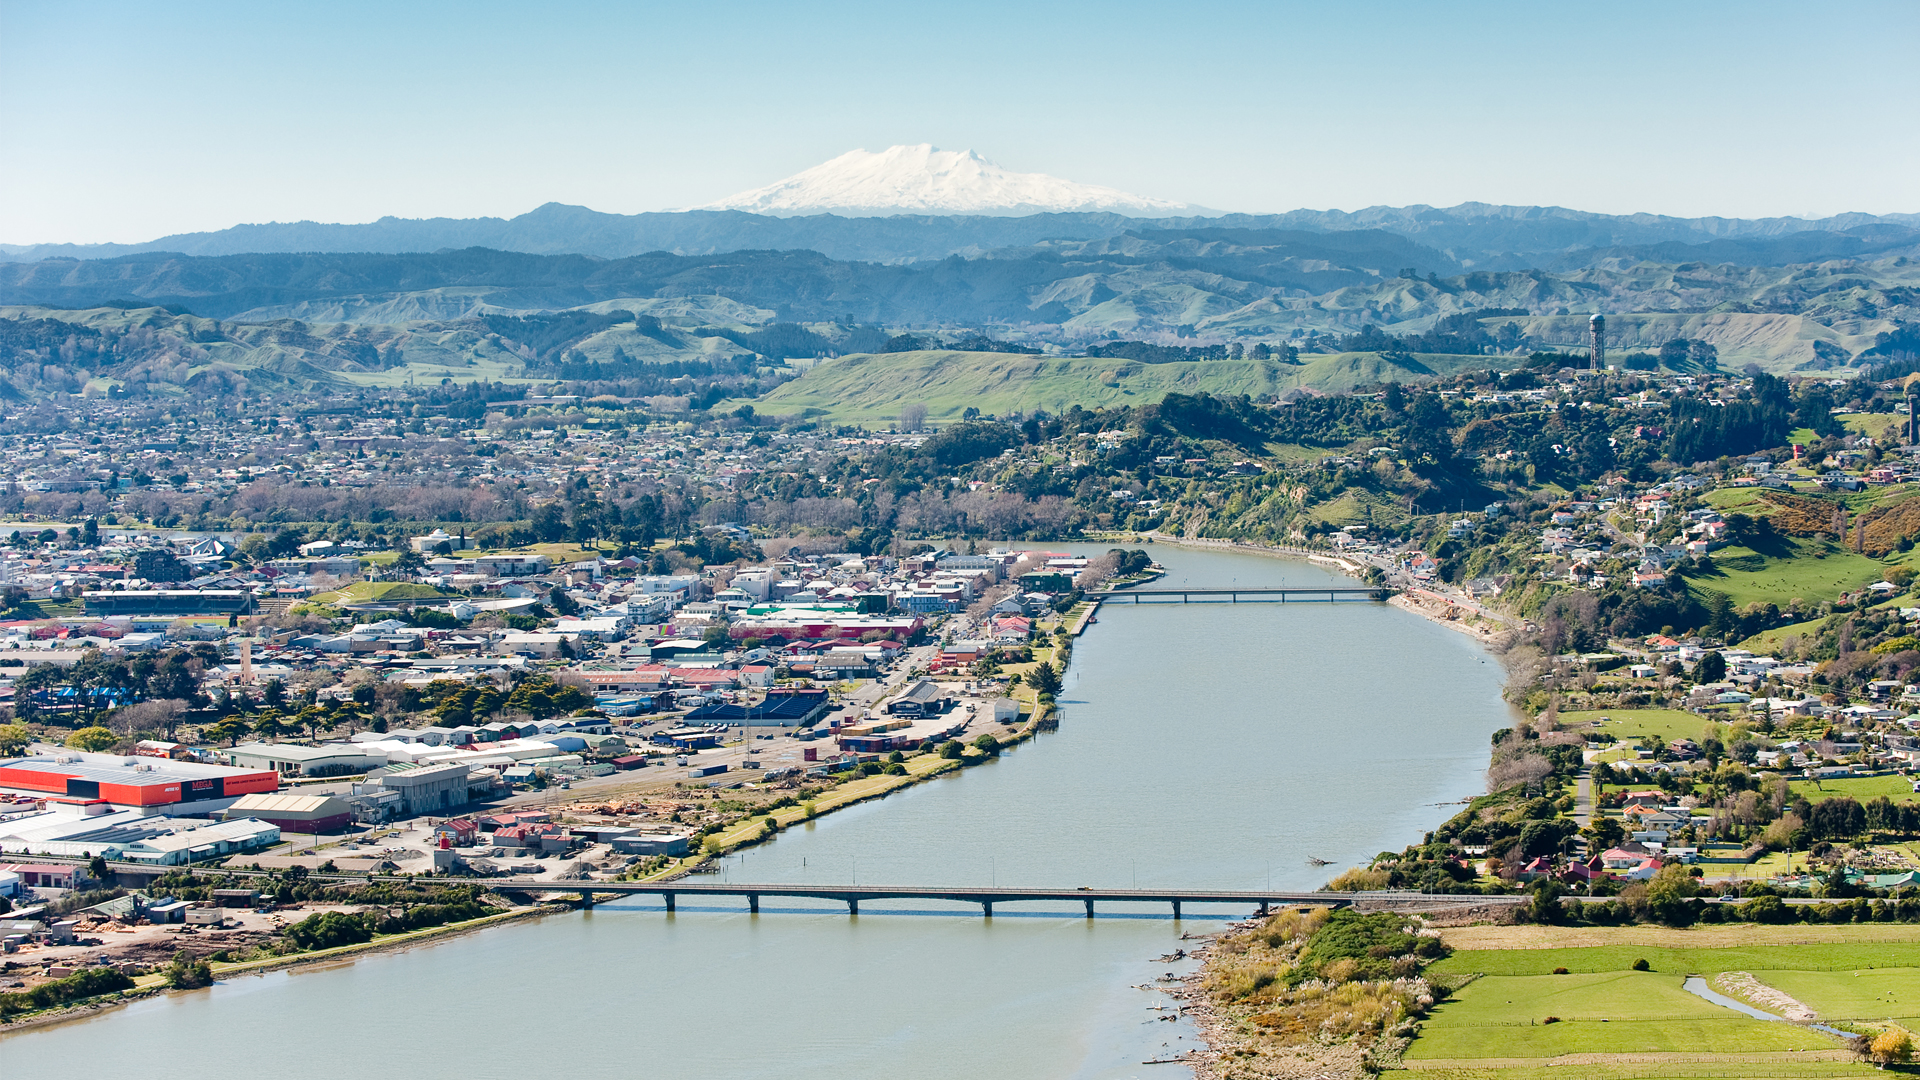 Aerial shot of the Whanganui River with Mount Ruapehu in the distance